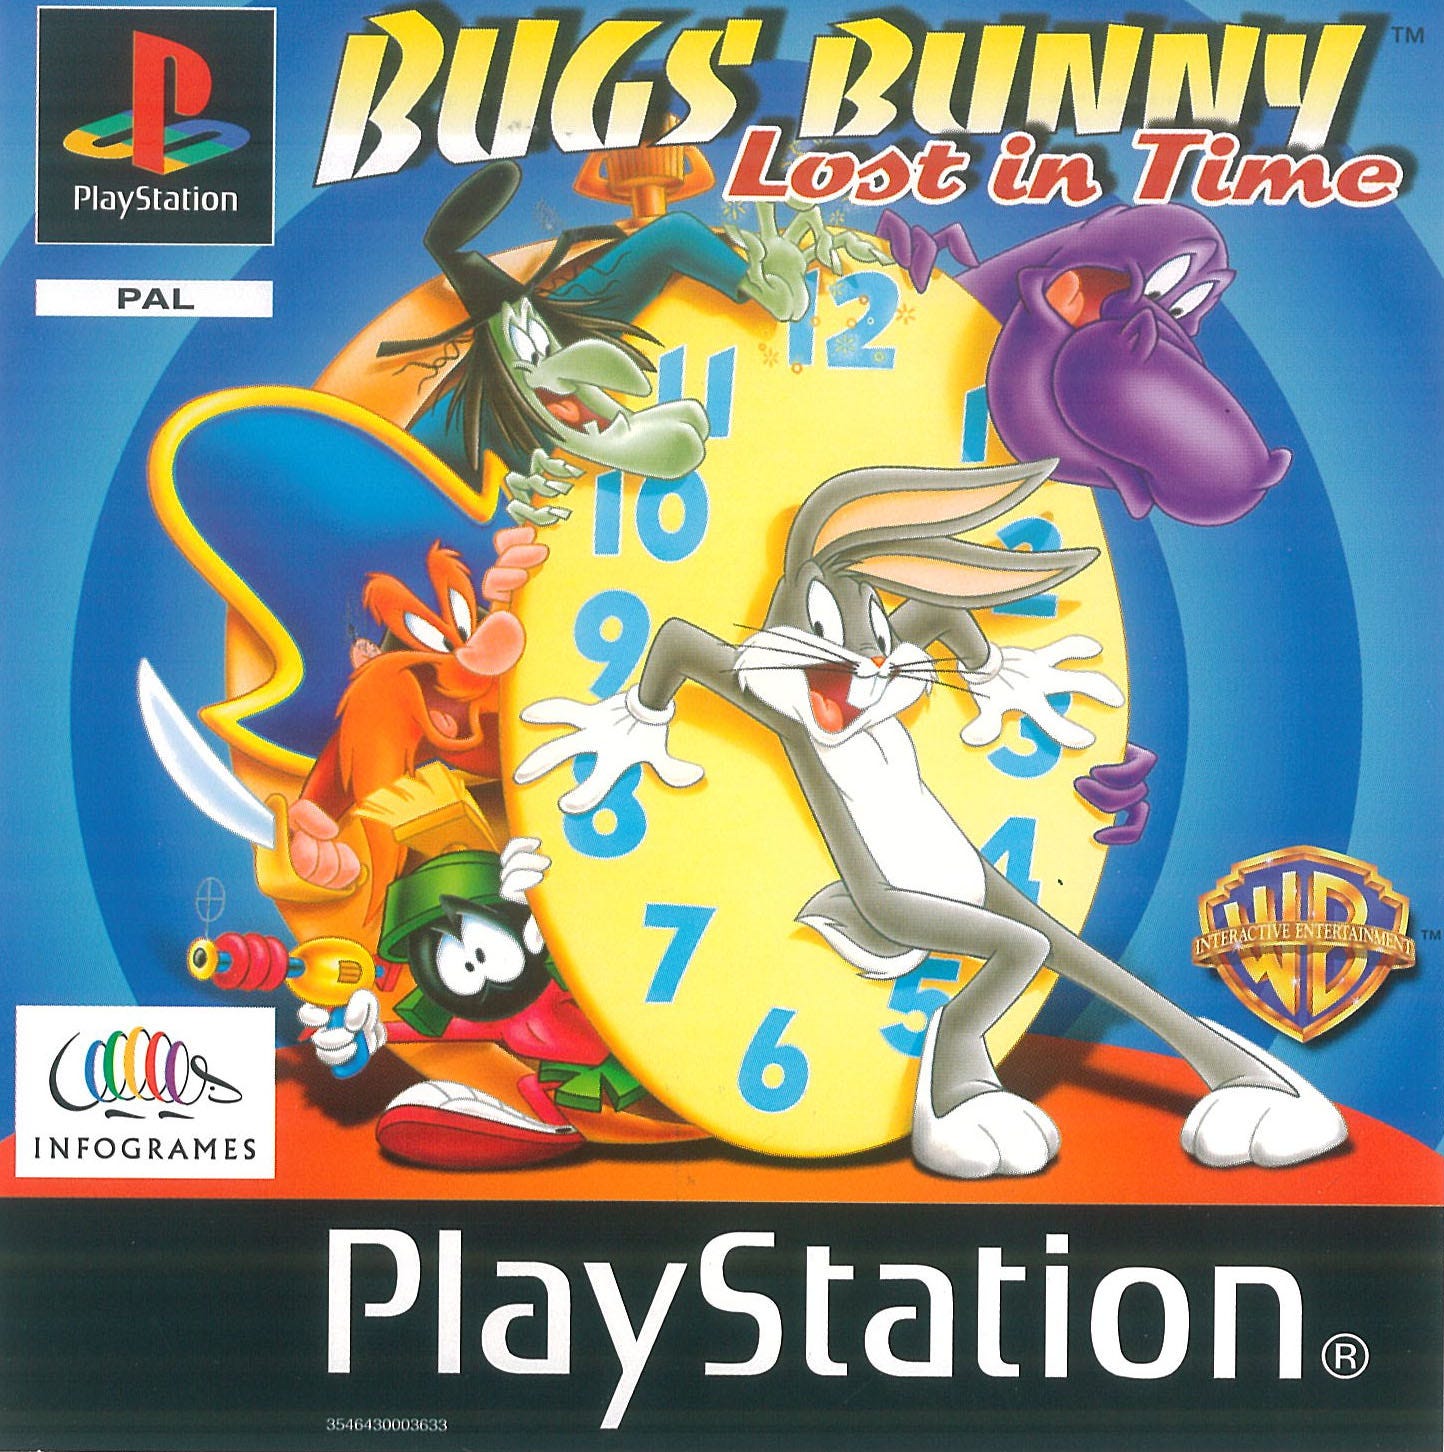 Bugs Bunny Lost in time PSX cover